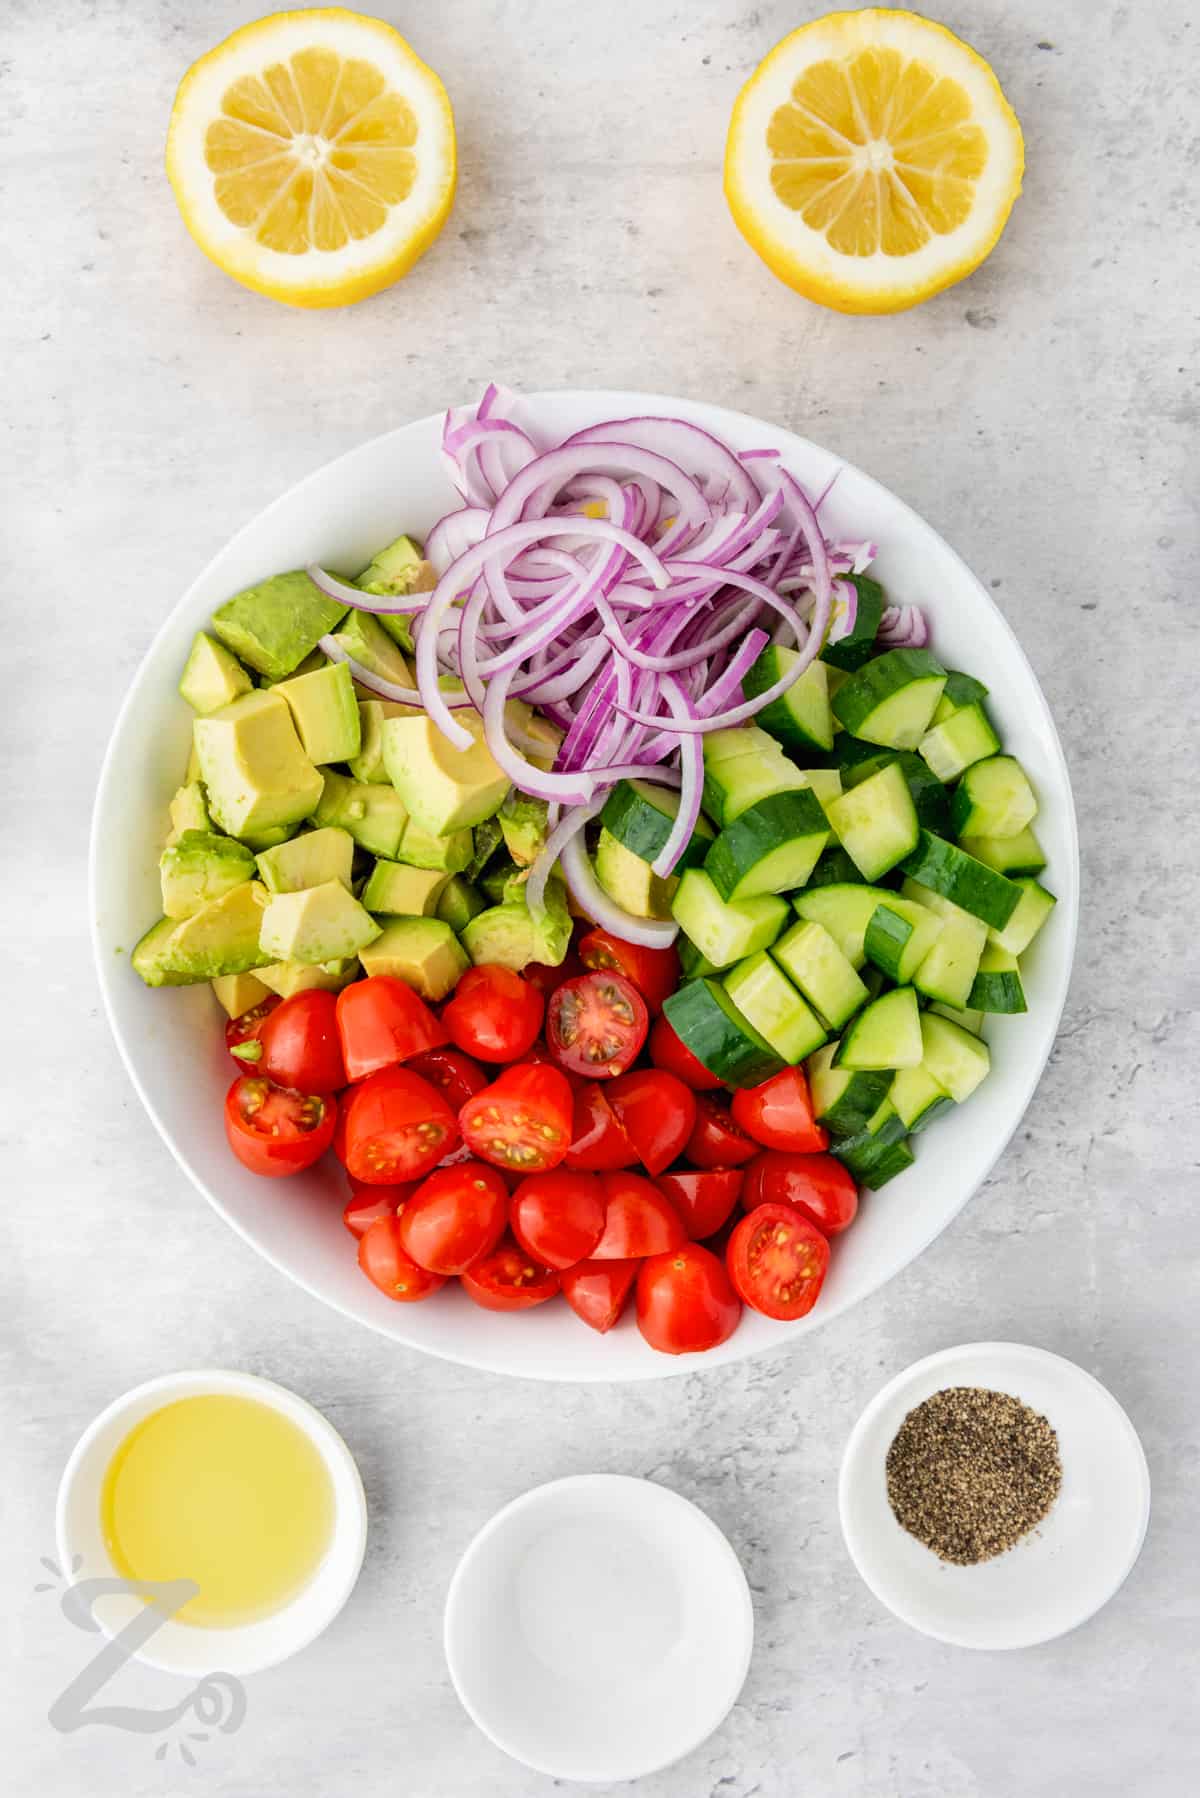 ingredients to make avocado salad in a bowl with the dressing ingredients on the side